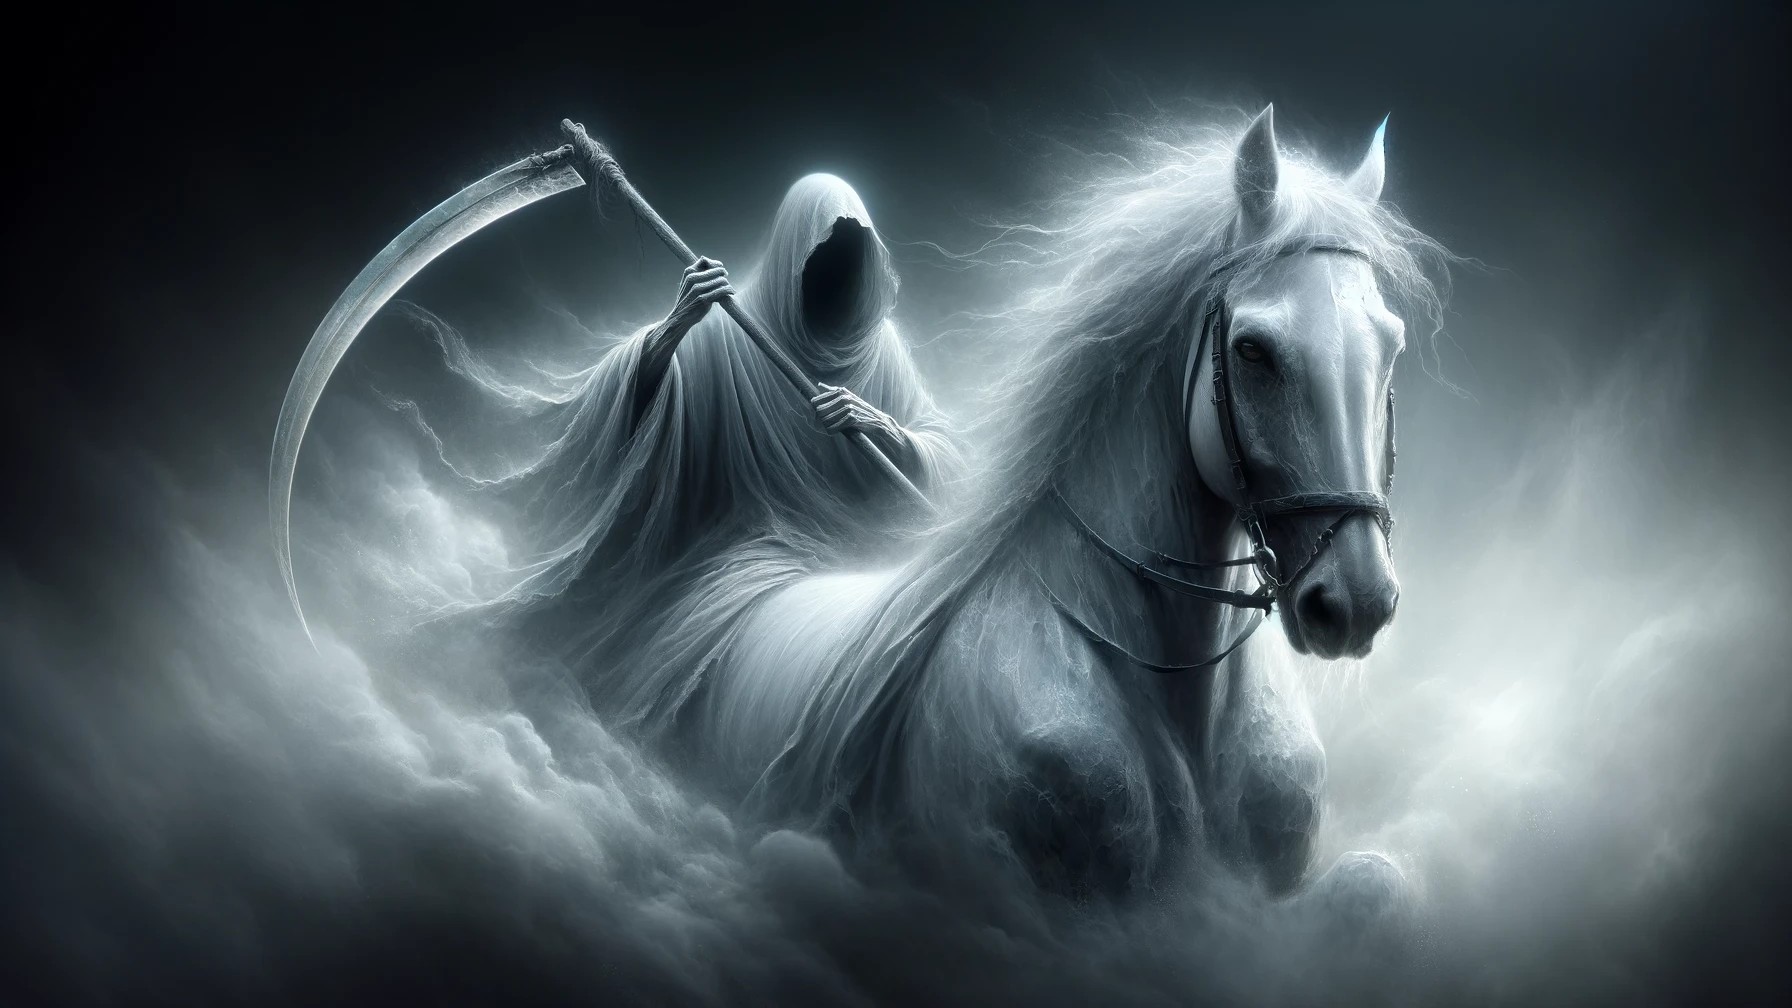 Who Rides The Pale Horse In The Book Of Revelation?